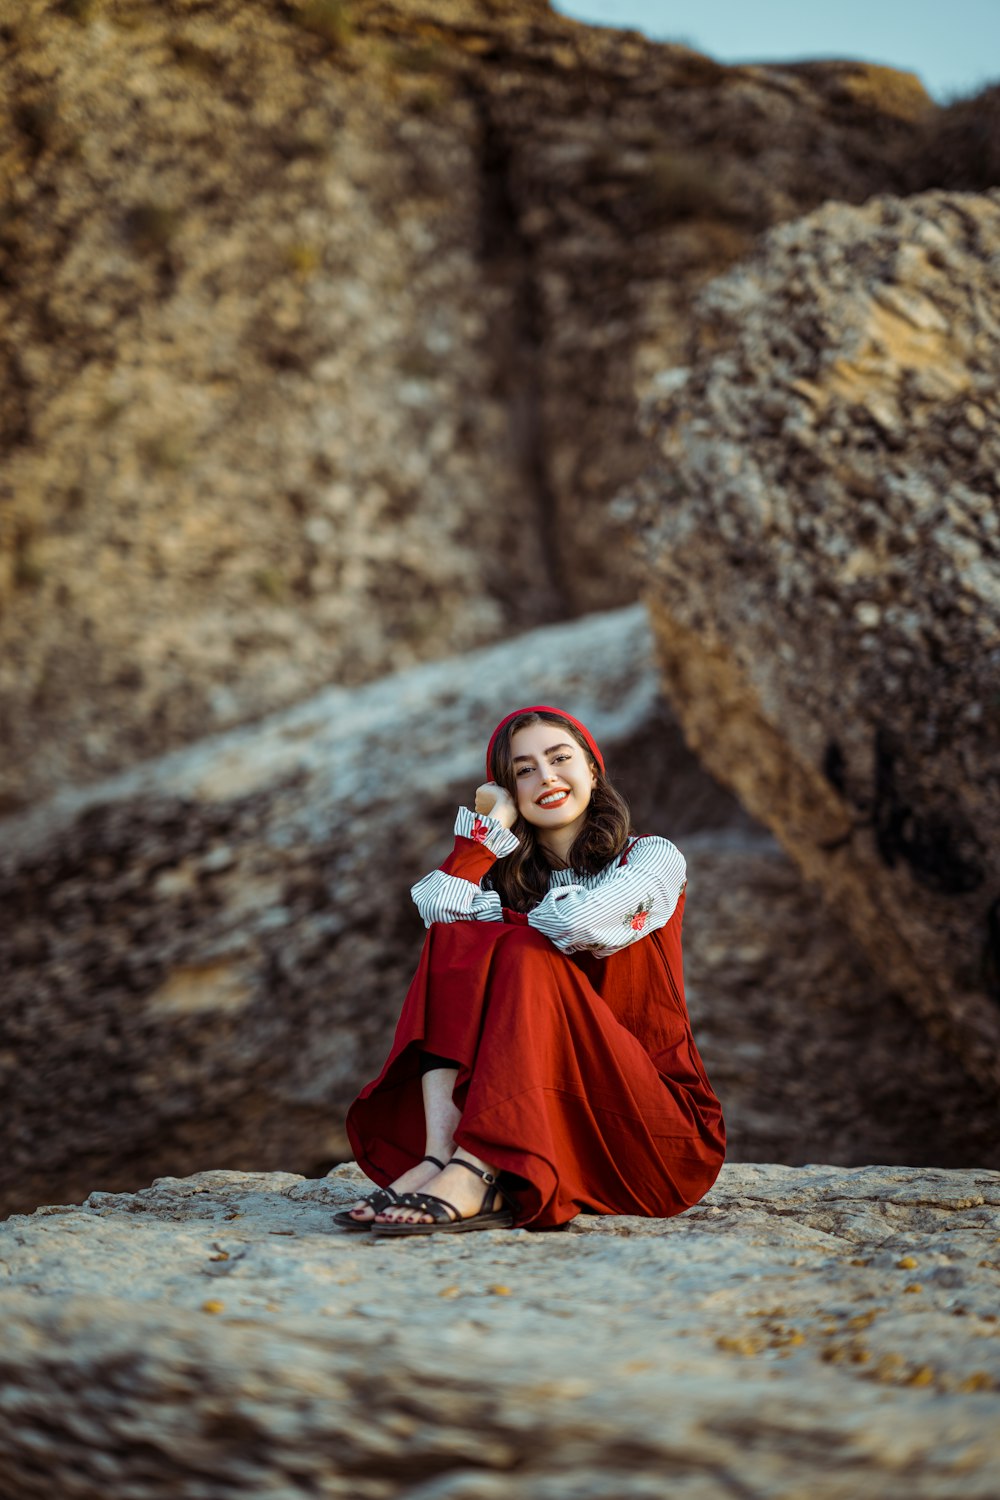 a person in a red dress sitting on a rock